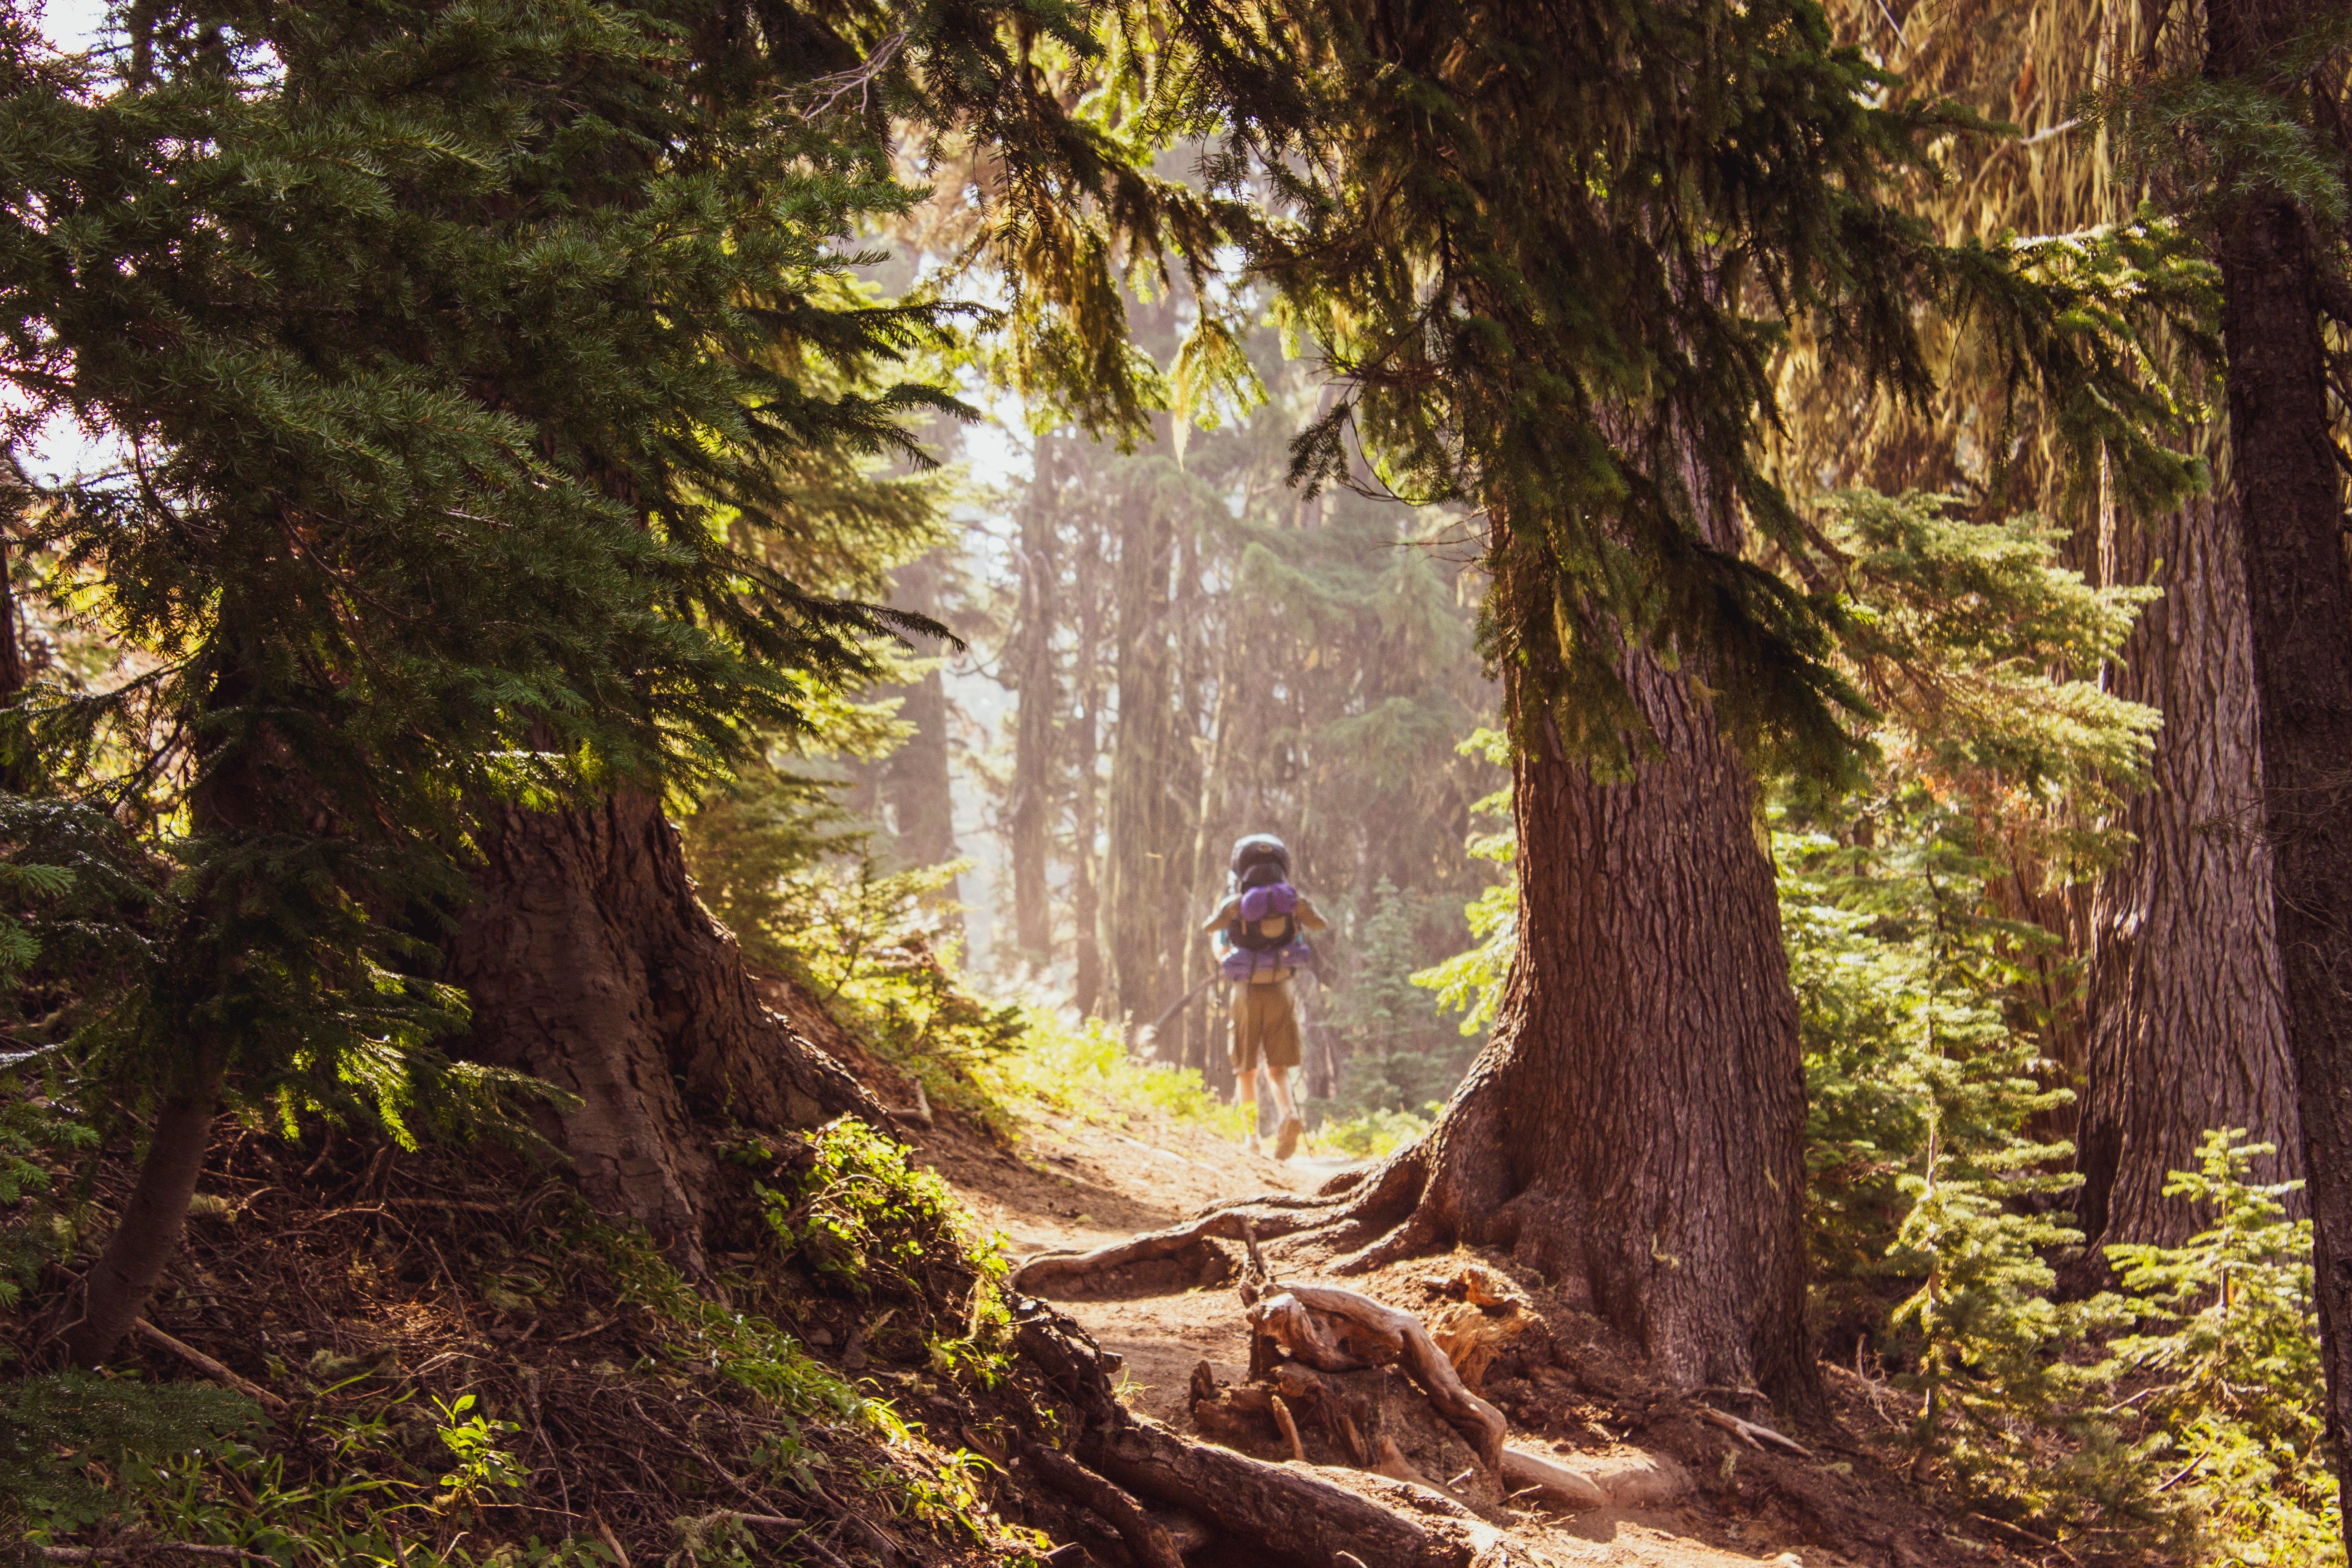 The Forest ecosystem is beloved for hiking © Eric Sanman / Pexels